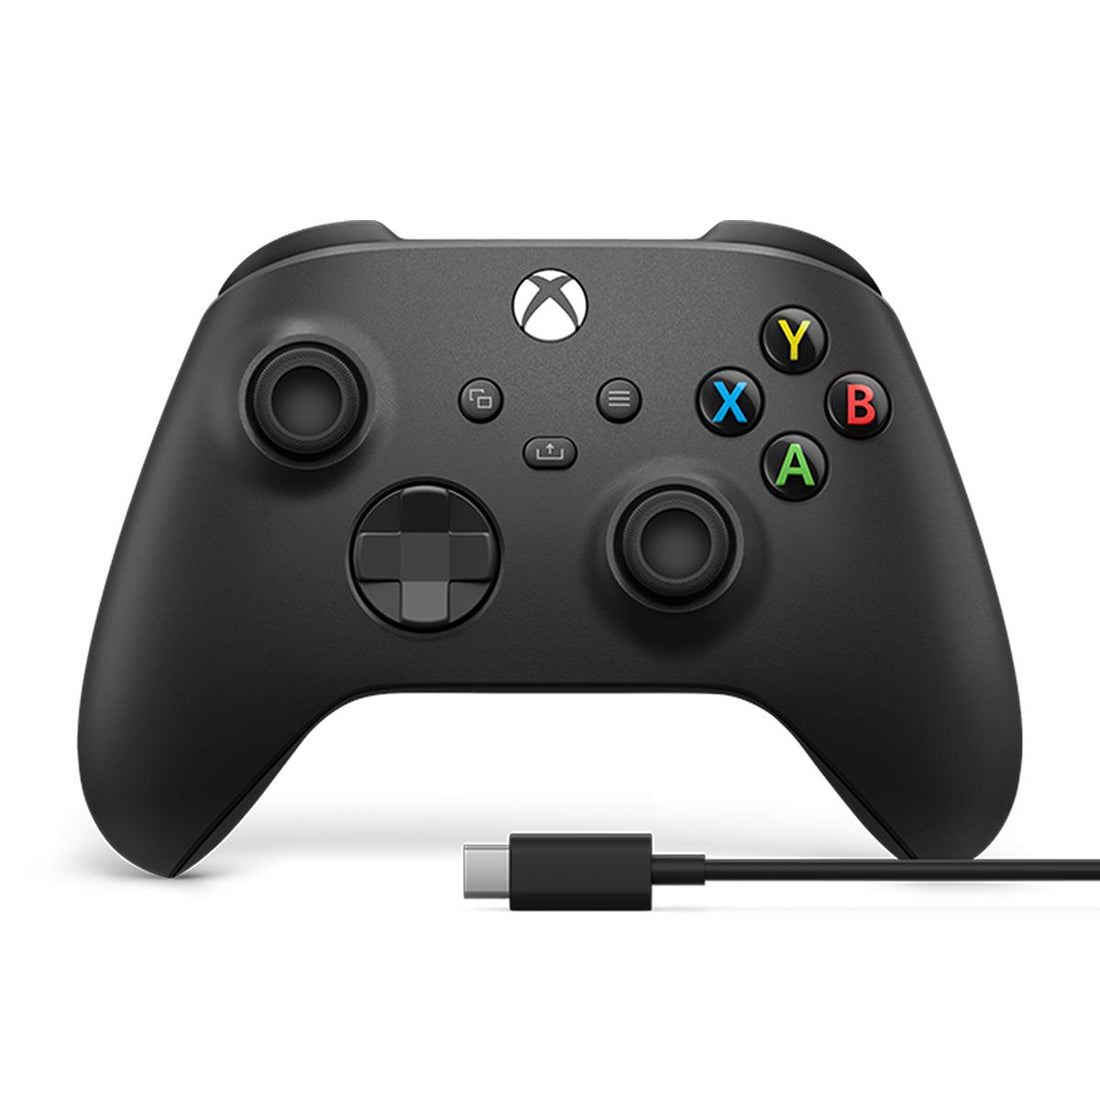 Microsoft Xbox Core Wireless Controller with USB-C Cable - Carbon Black (Certified Refurbished)